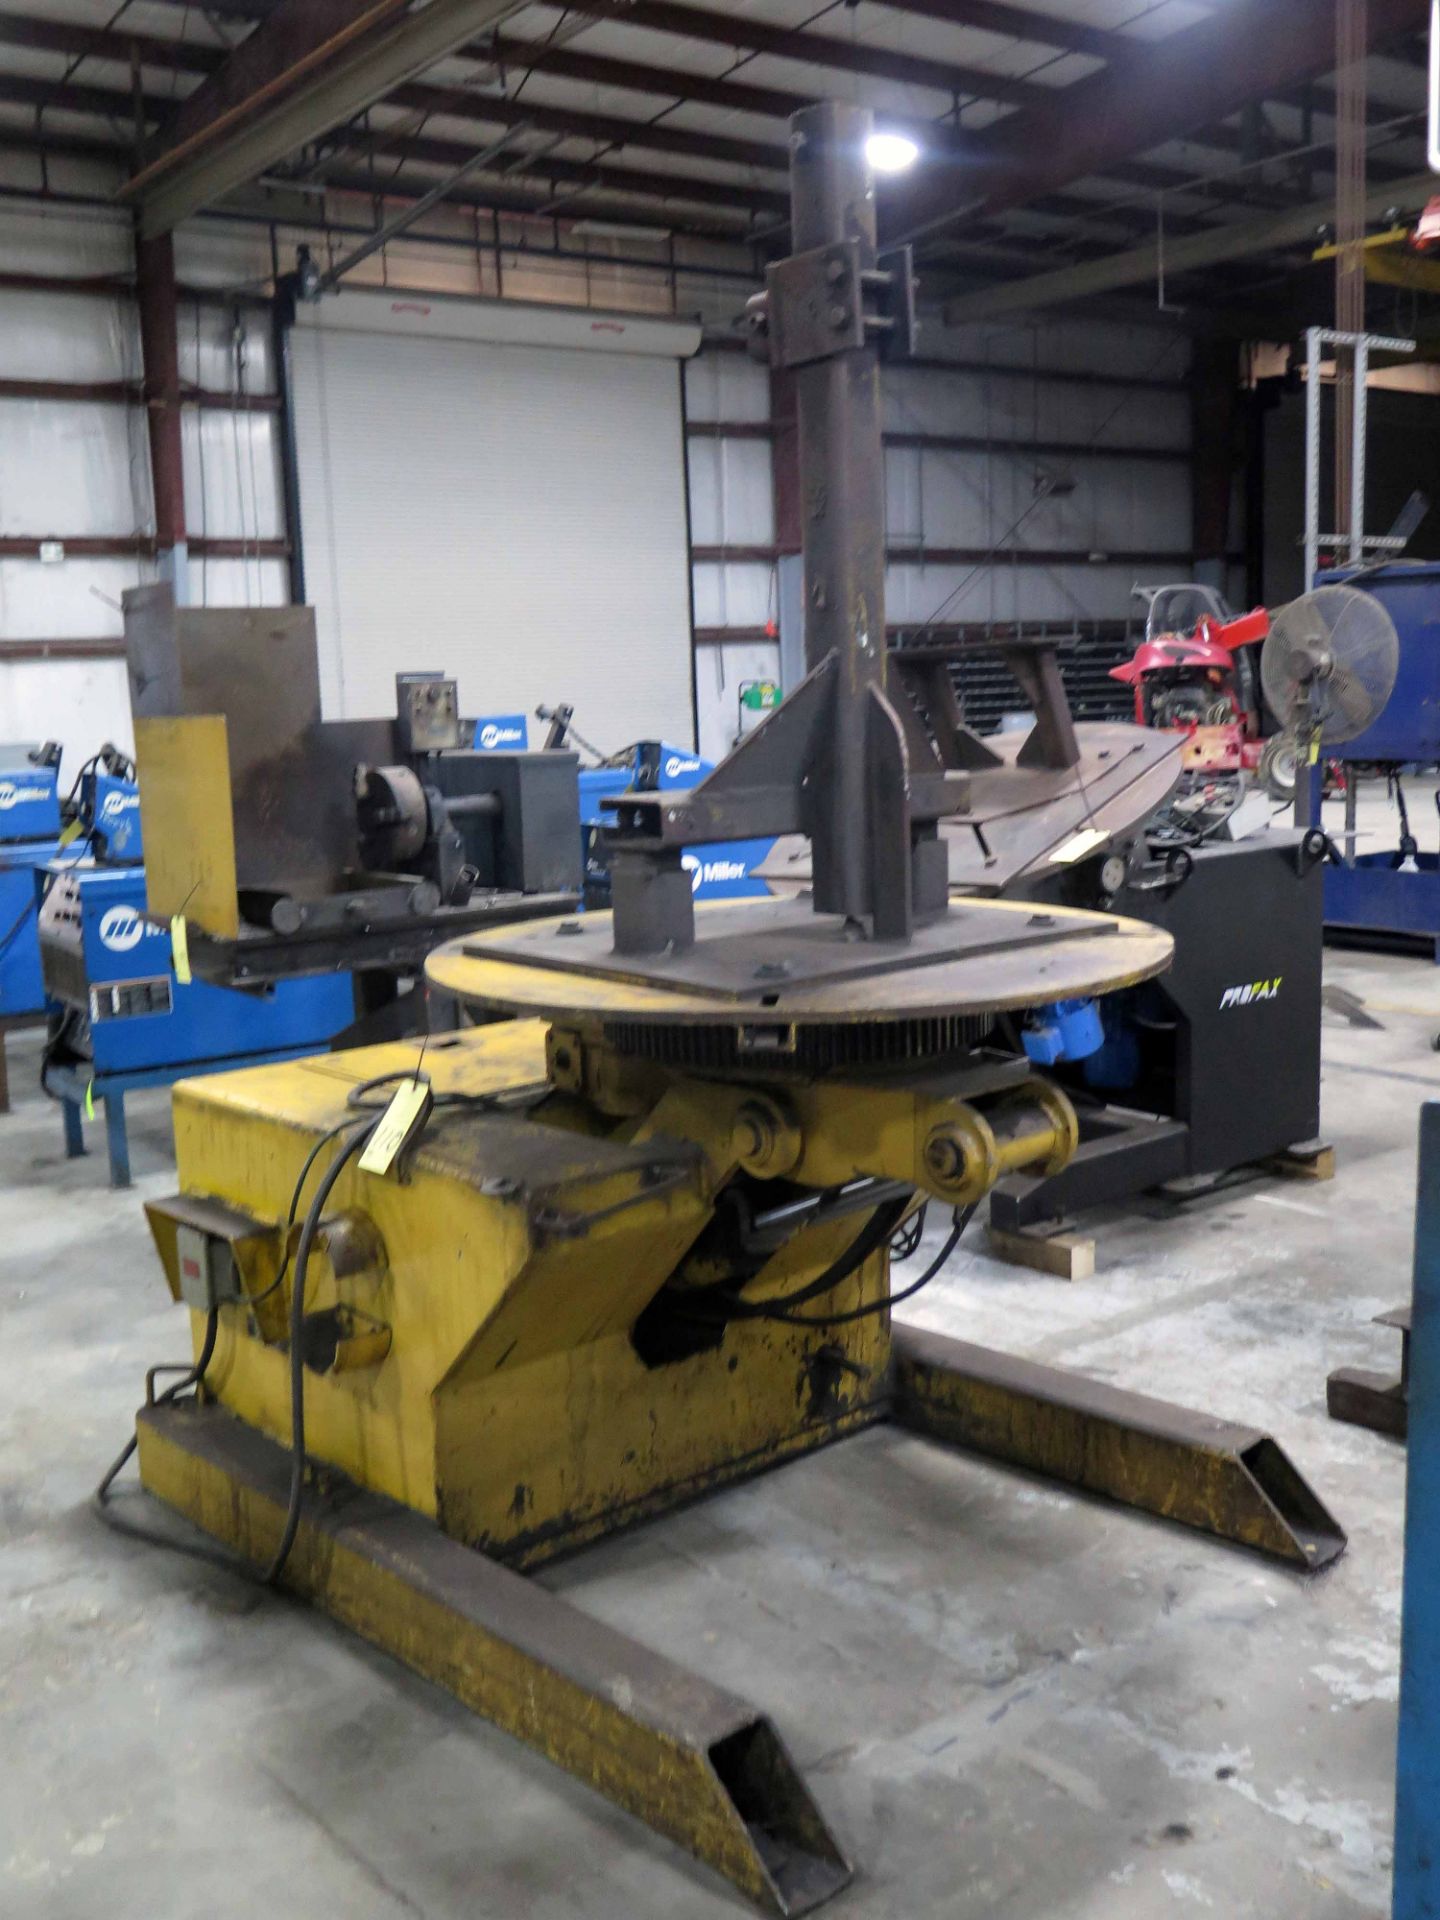 WELDING POSITIONER, AMERICAN EAGLE (MG. BY WELD MOTION INC.) 17,000 LB. CAP. MDL. AE-170, 17,000 lb. - Image 2 of 3